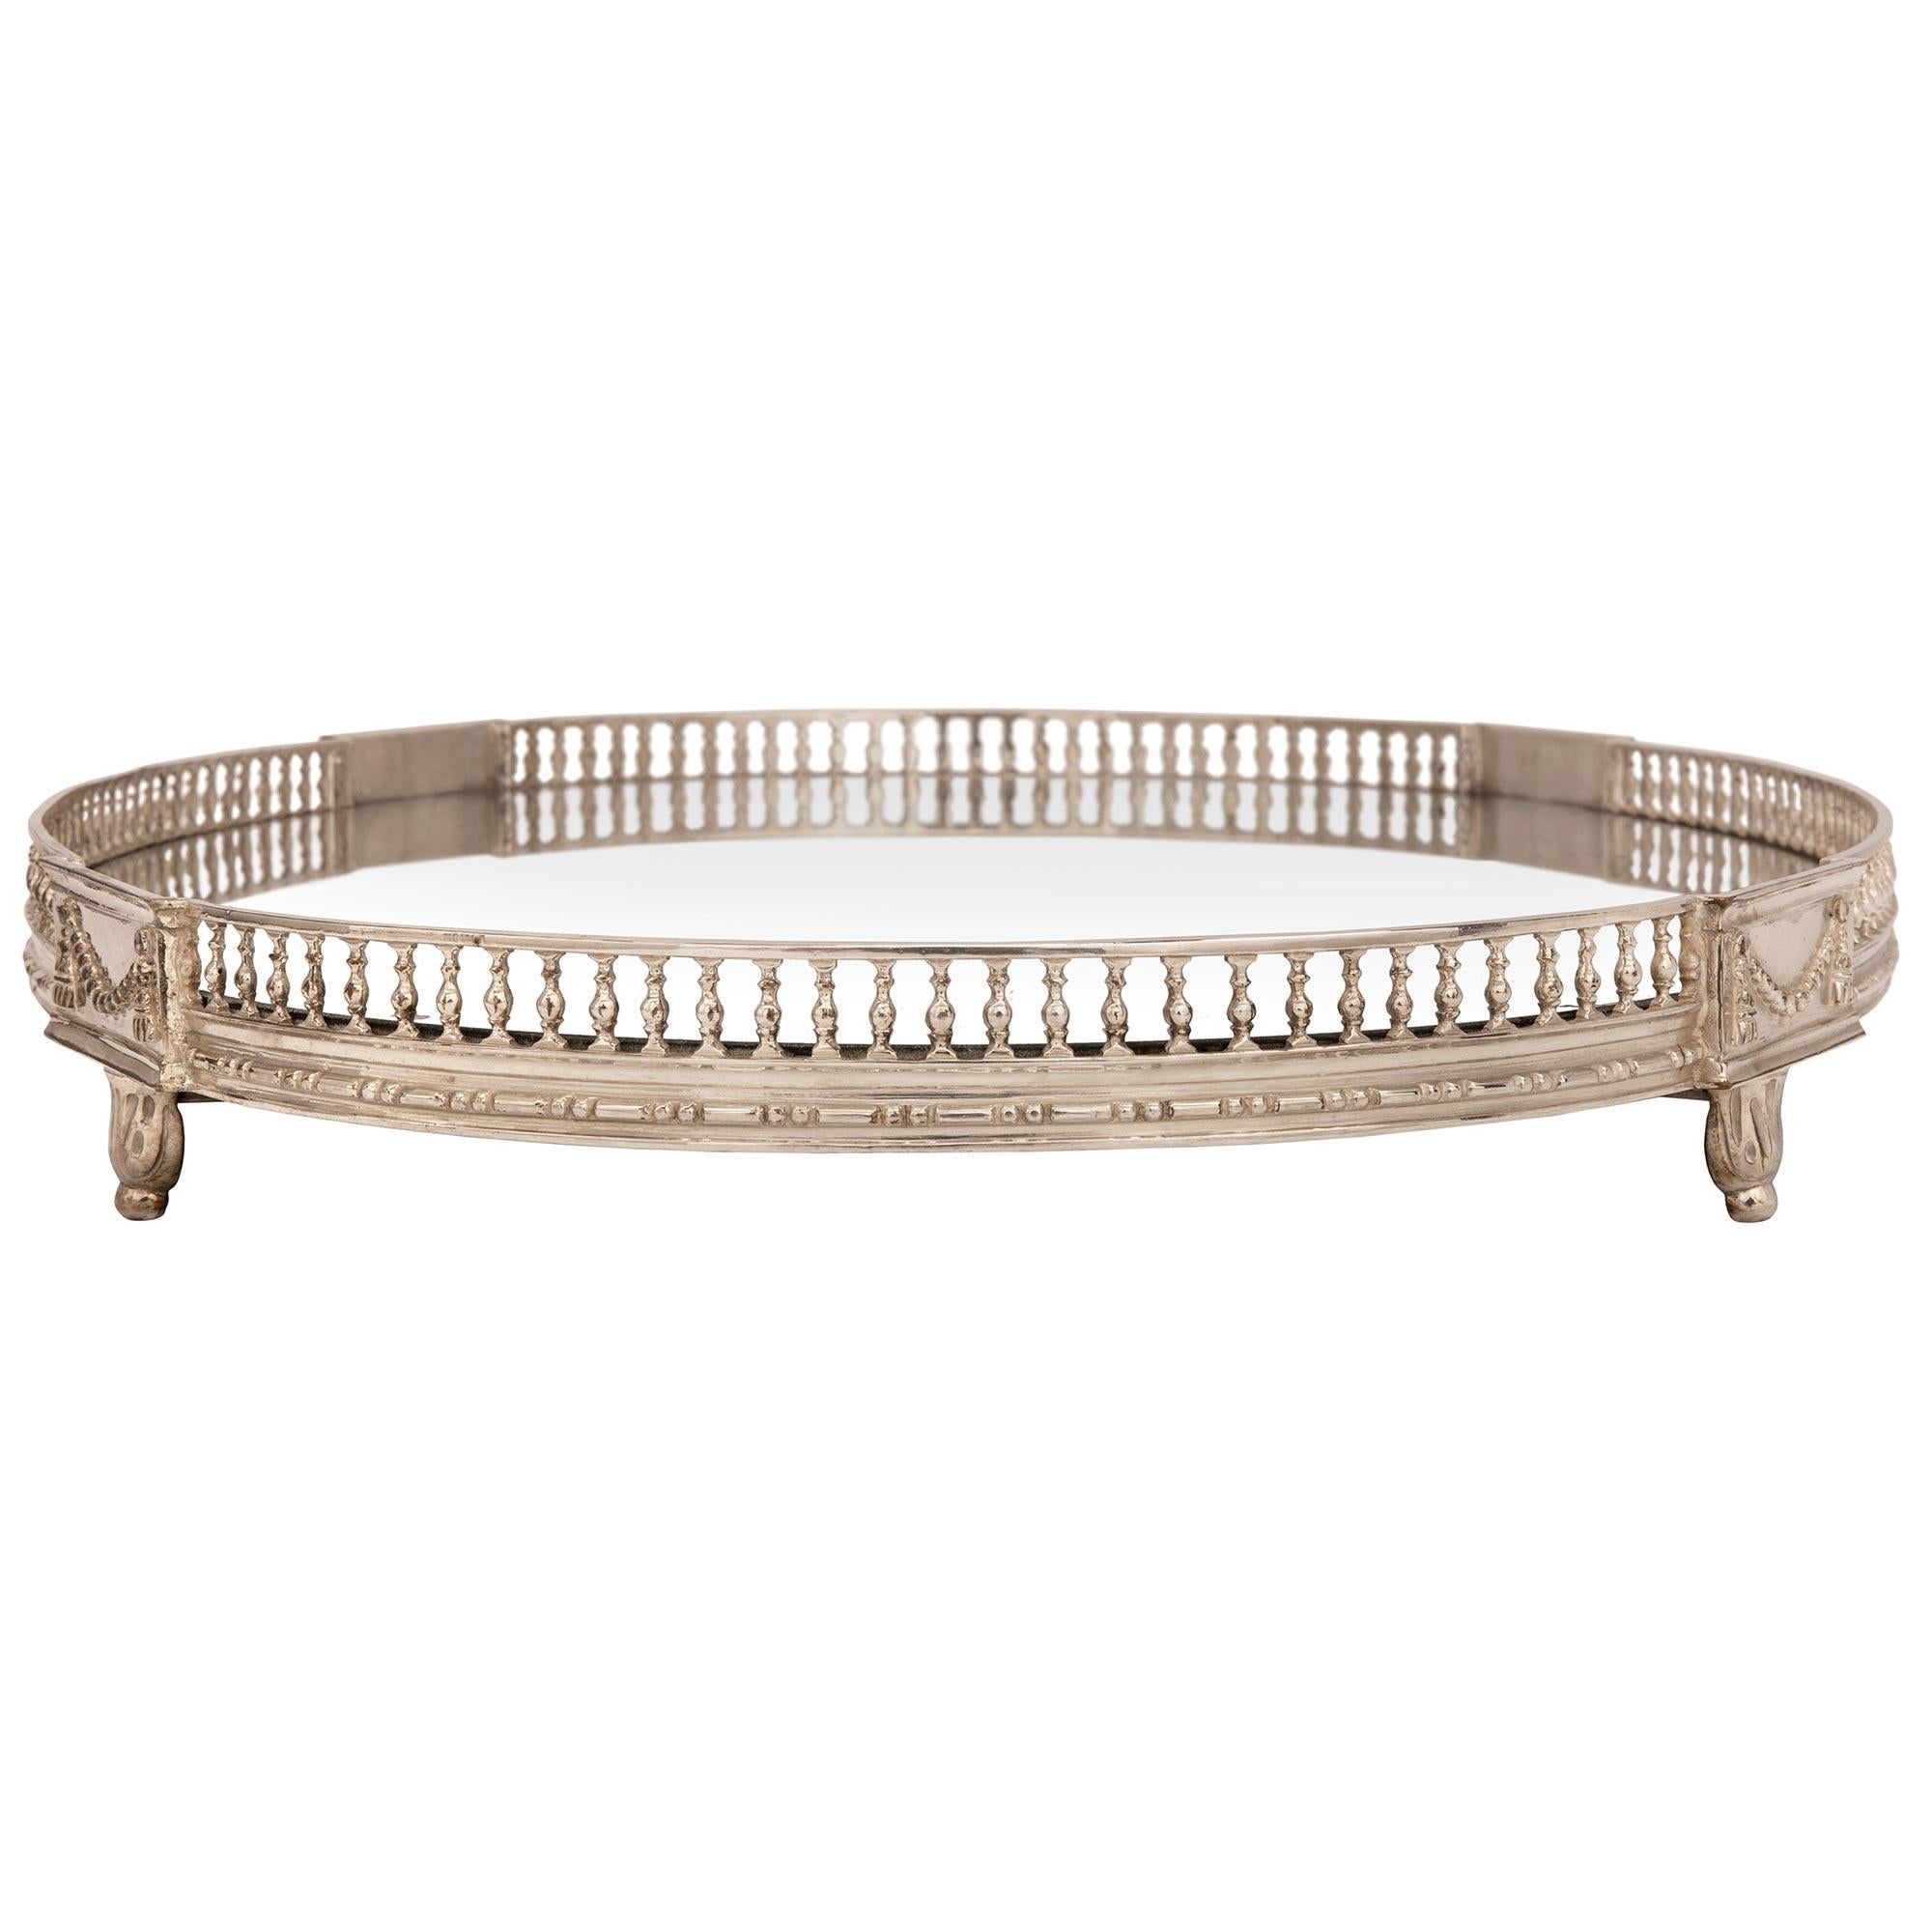  French Mid 19th Century Louis XVI St. Oval Shaped Silvered Bronze Centerpiece For Sale 1